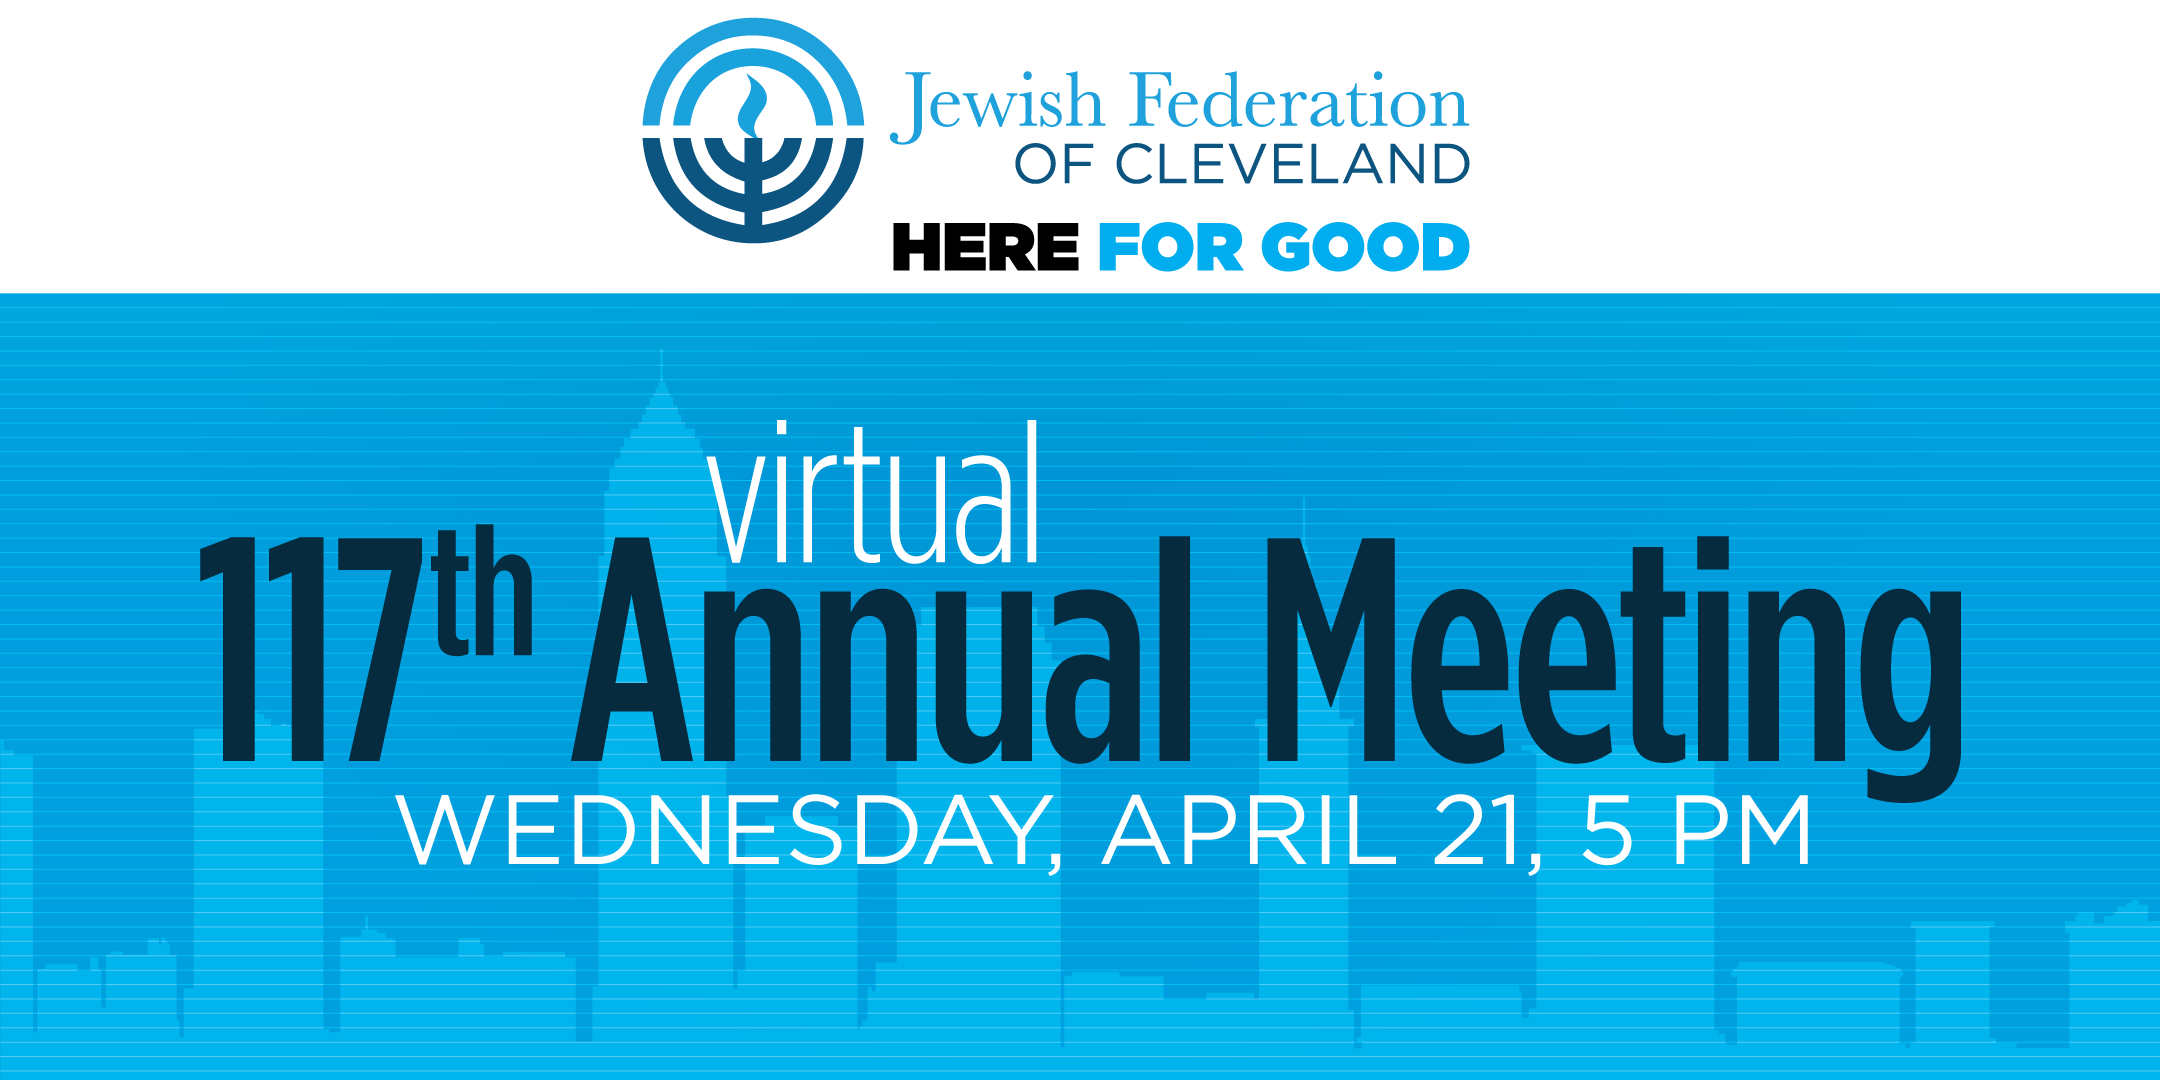 117th Annual Meeting of the Jewish Federation of Cleveland Set for April 21